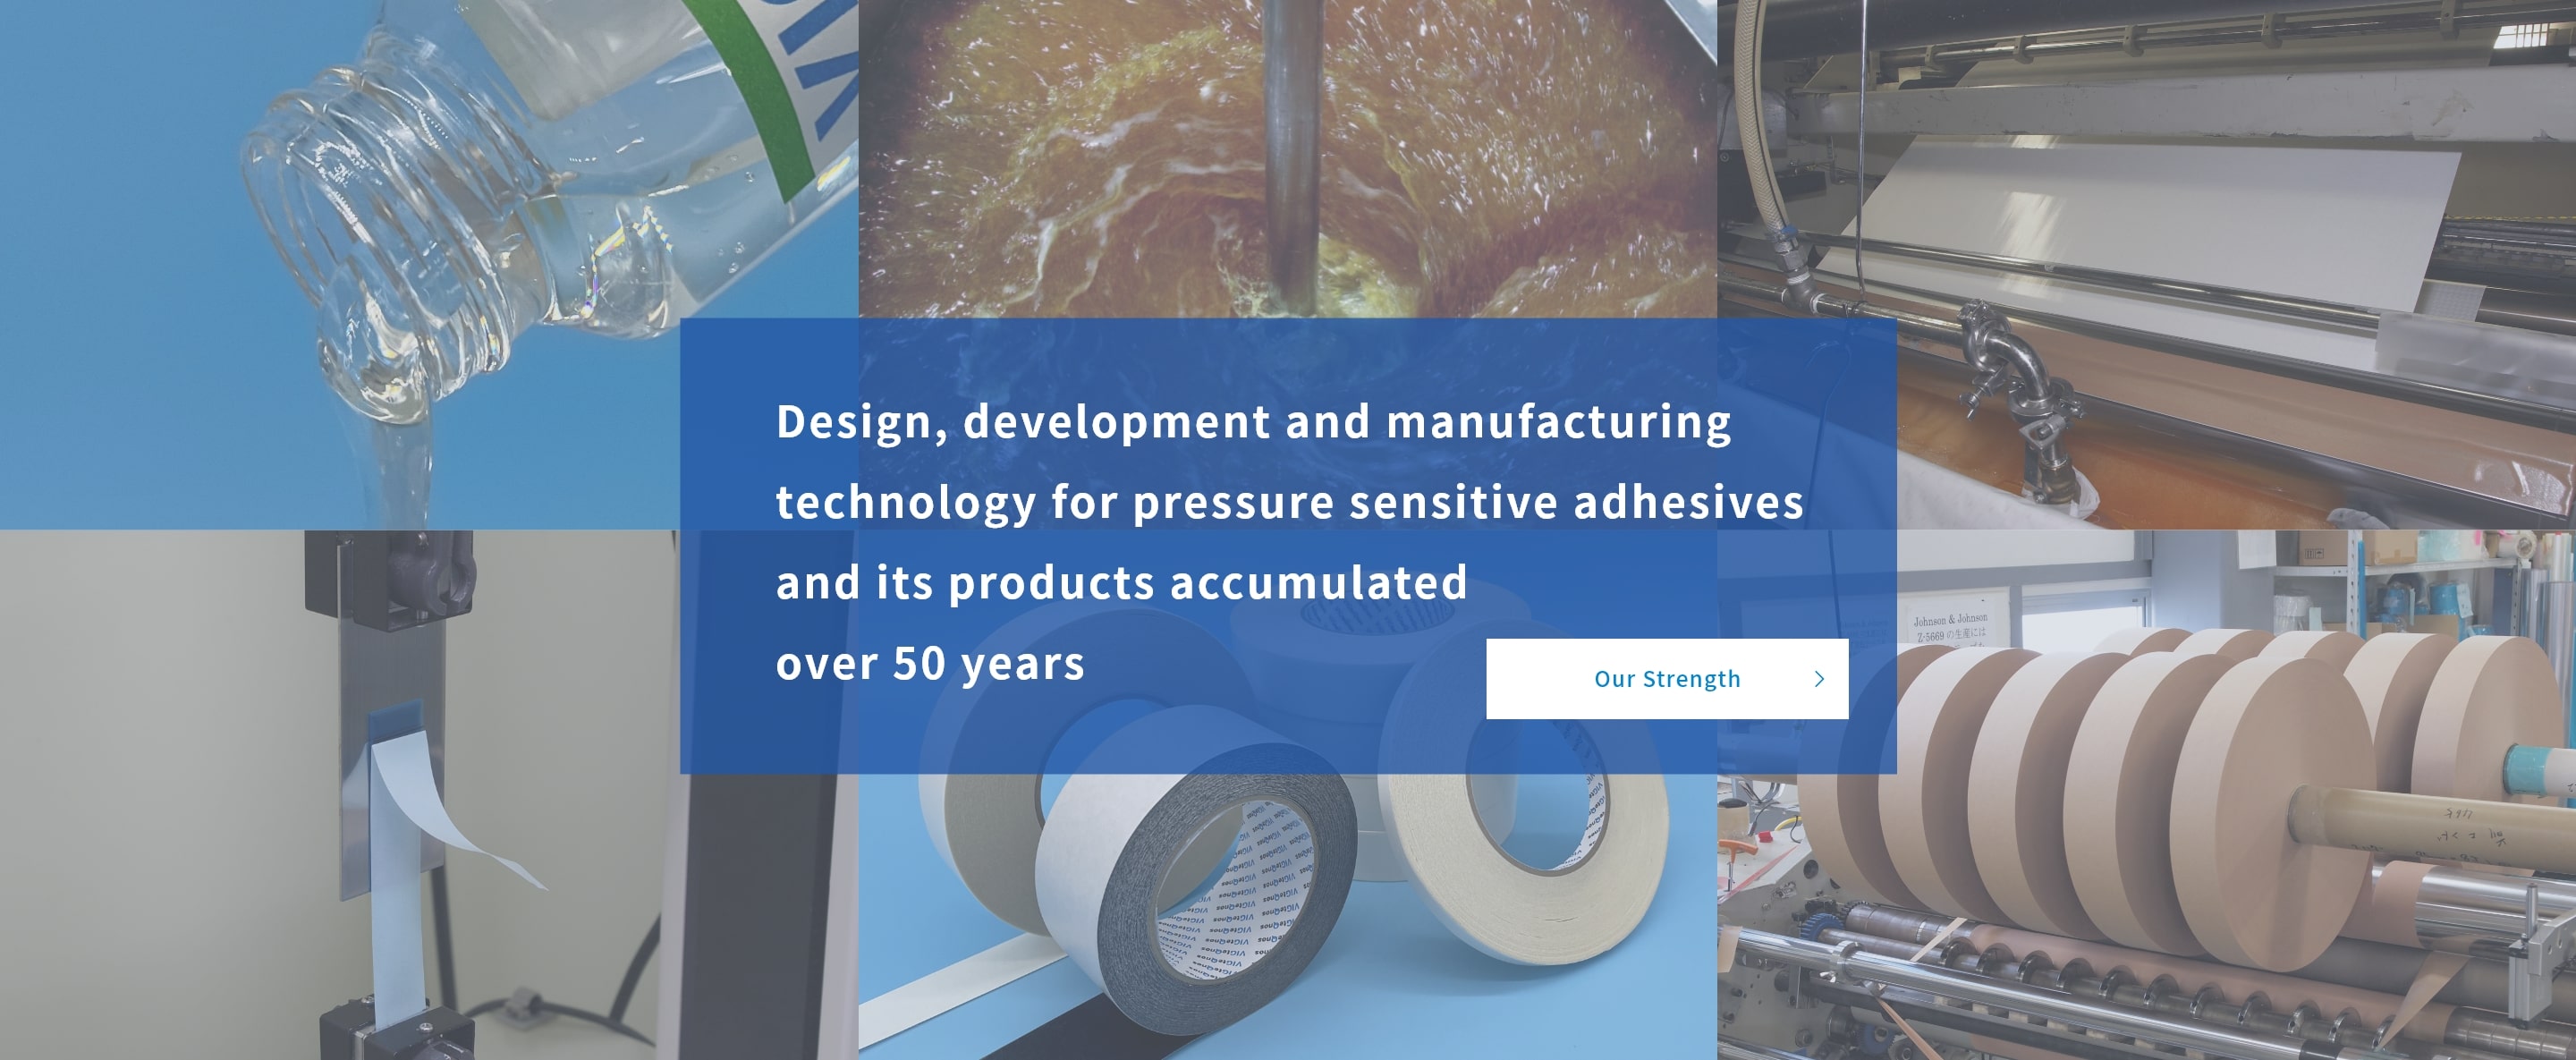 Design, development and manufacturing technology for pressure sensitive adhesives and its products accumulated over 50 years